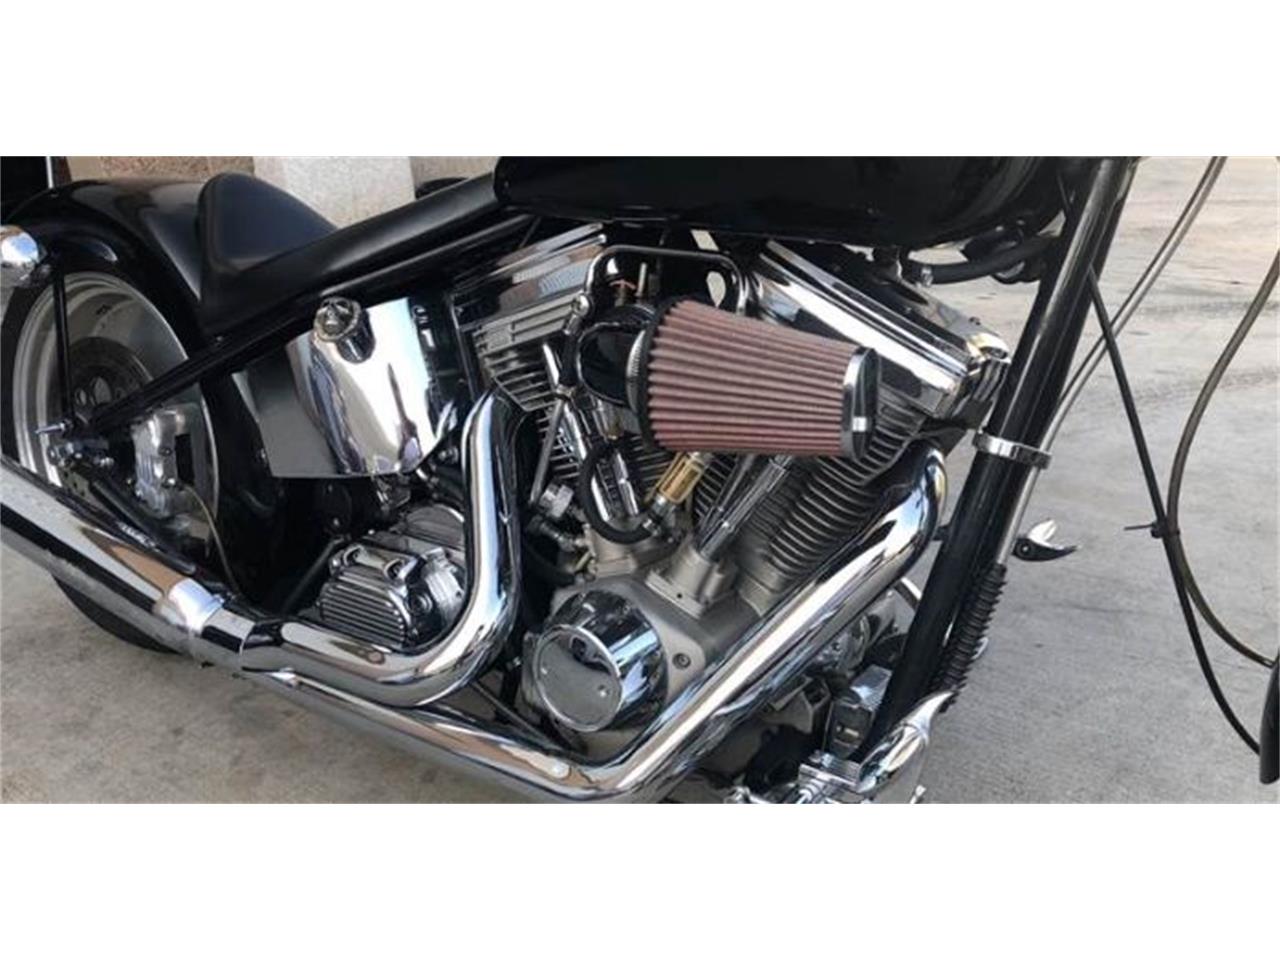 2002 Harley-Davidson Motorcycle for sale in Cadillac, MI – photo 7